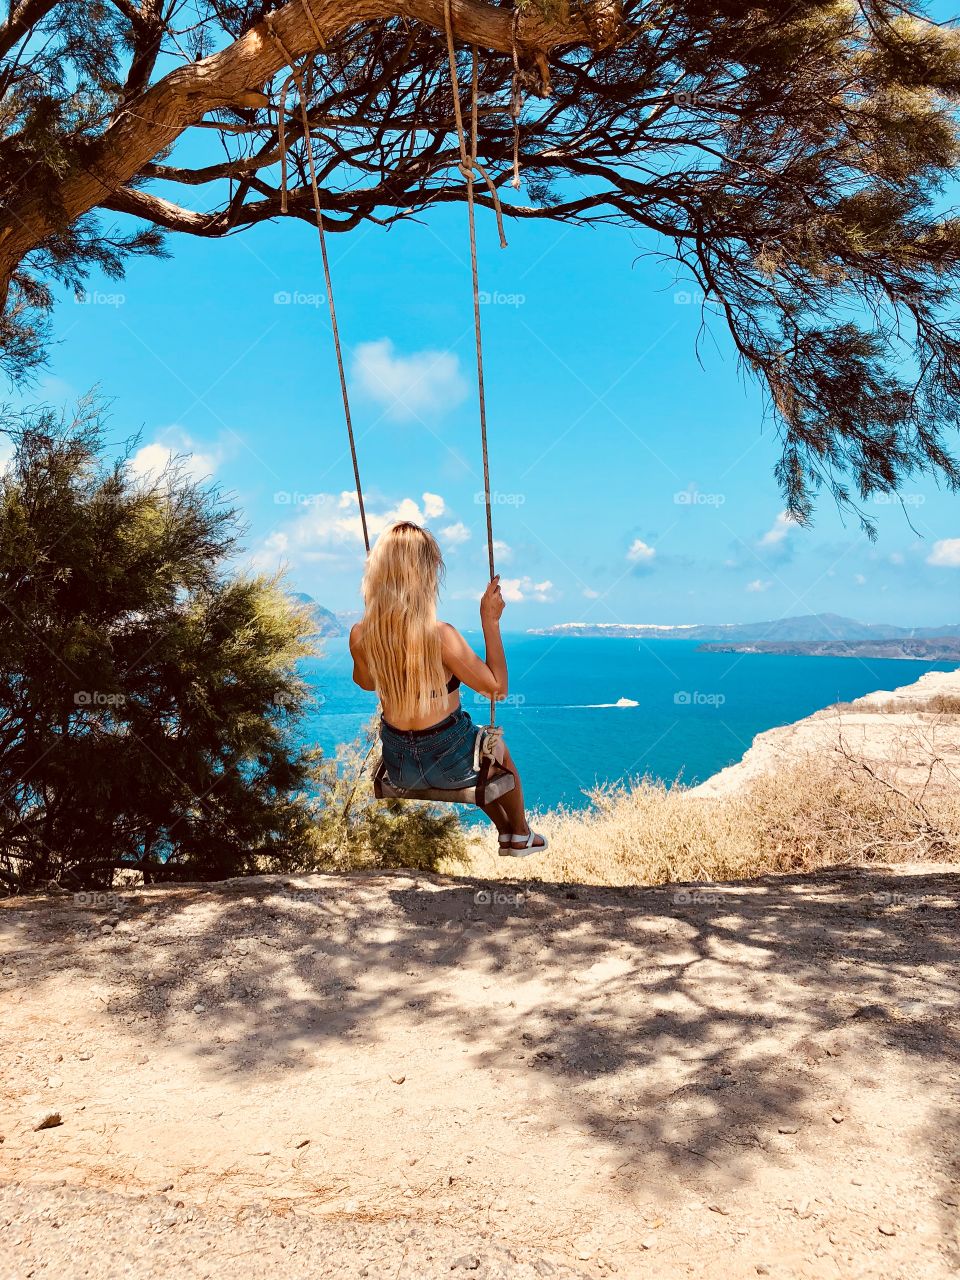 A young blonde girl swinging on a swing, around the beautiful views of the sea and the cliffs of Santorini Island.